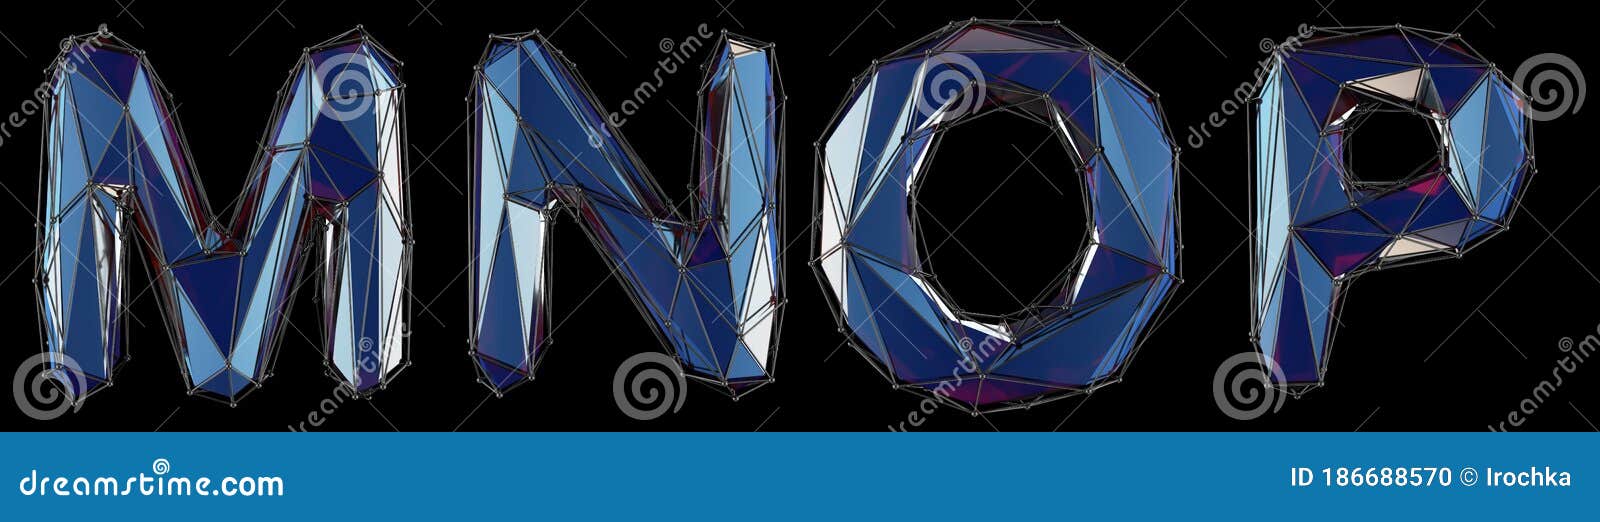 realistic 3d set of letters m, n, o, p made of low poly style. collection s of low poly style blue color glass